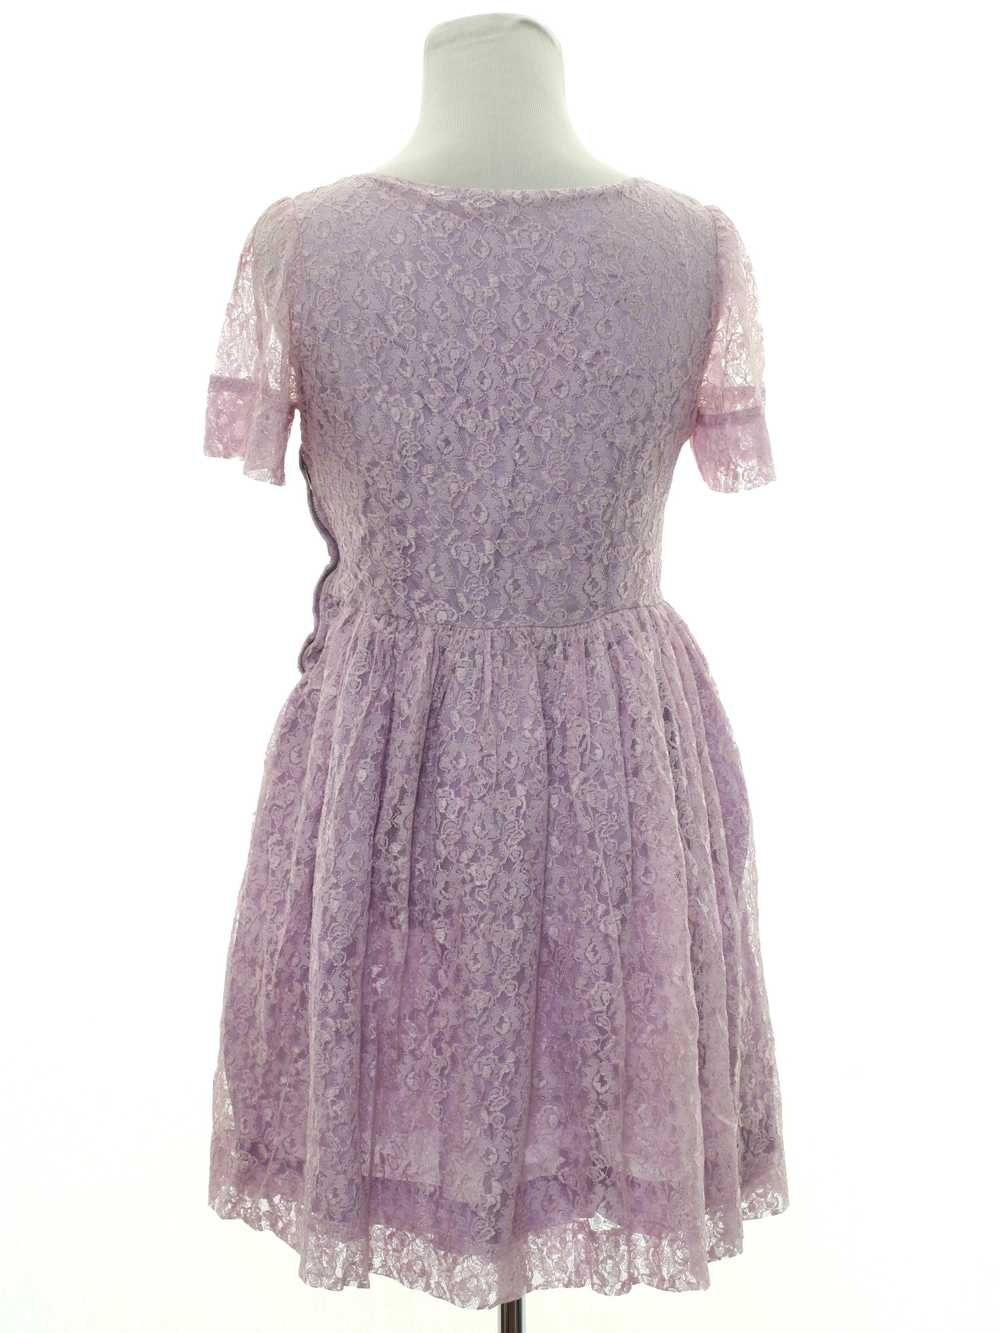 1960's or Girls Prom Or Cocktail Mini Dress - image 3